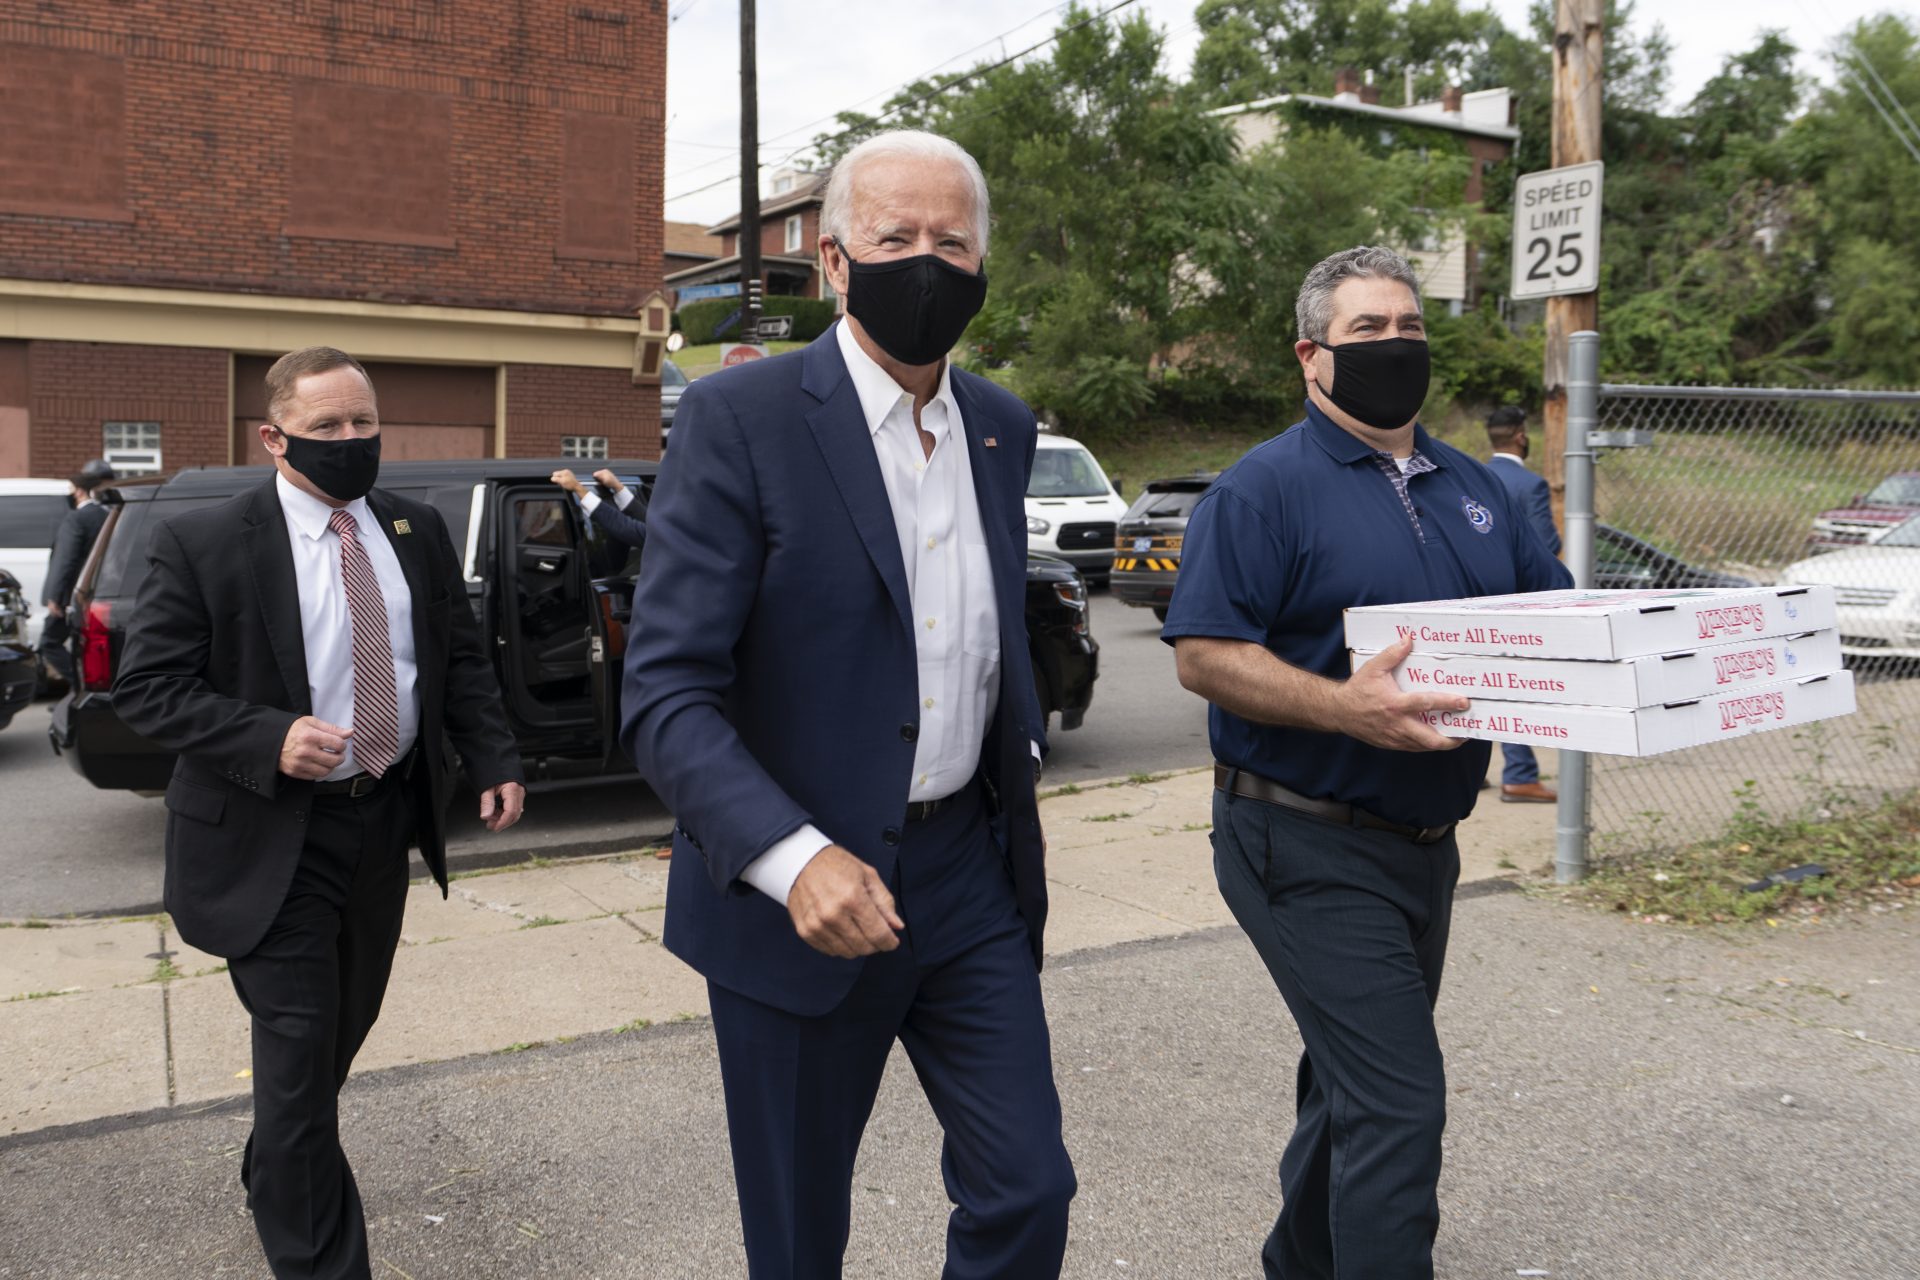 Democratic presidential candidate former Vice President Joe Biden arrises with pizza as he visits Pittsburgh Local Fire Fighters No. 1 in Pittsburgh, Pa., Monday, Aug. 31, 2020.